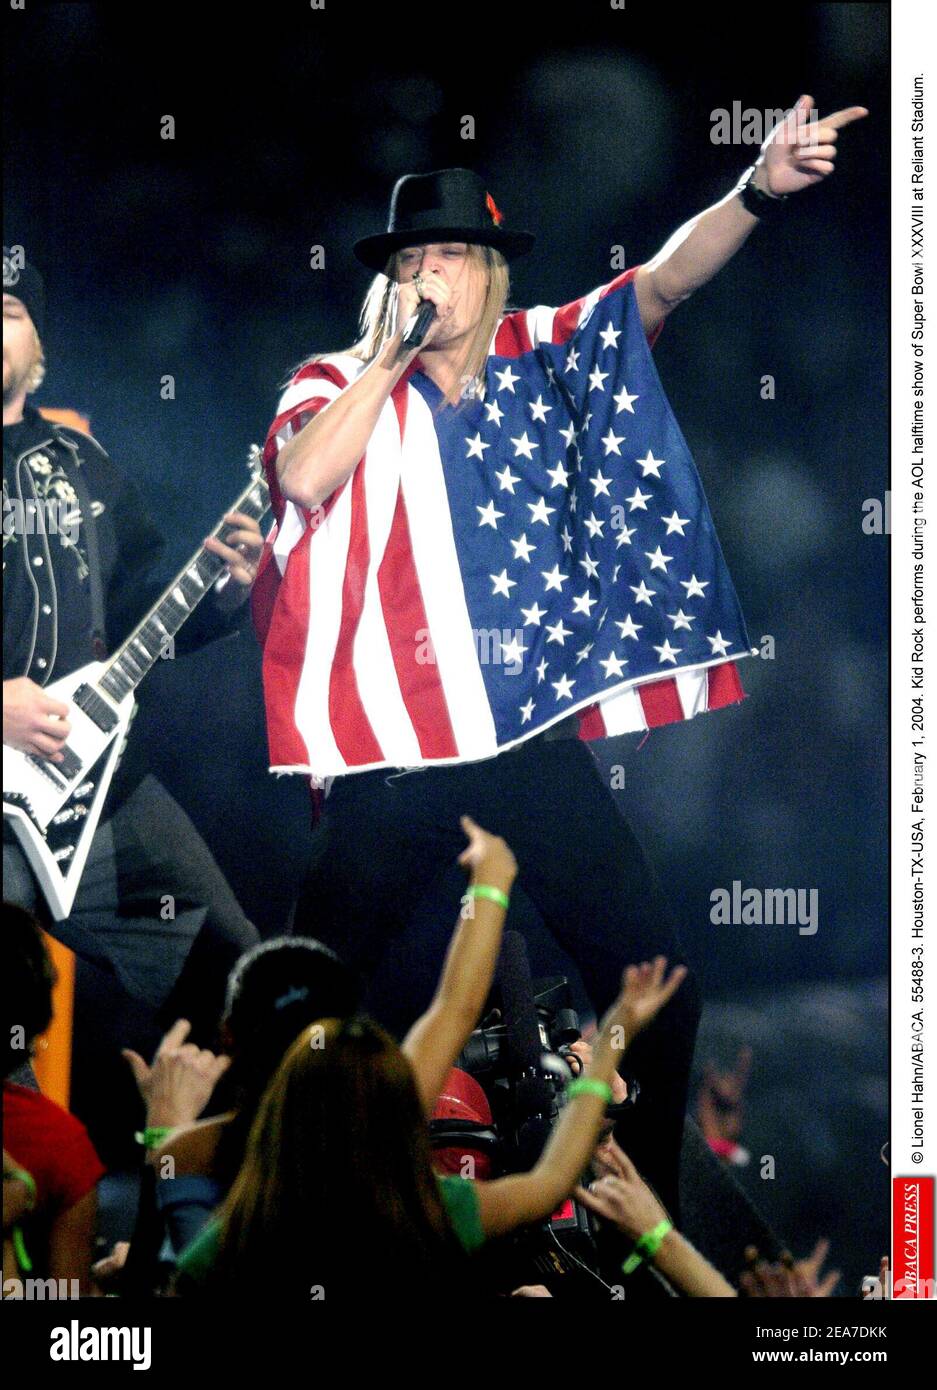 © Lionel Hahn/ABACA. 55488-3. Houston-TX-USA, February 1, 2004. Kid Rock performs during the AOL halftime show of Super Bowl XXXVIII at Reliant Stadium. Stock Photo